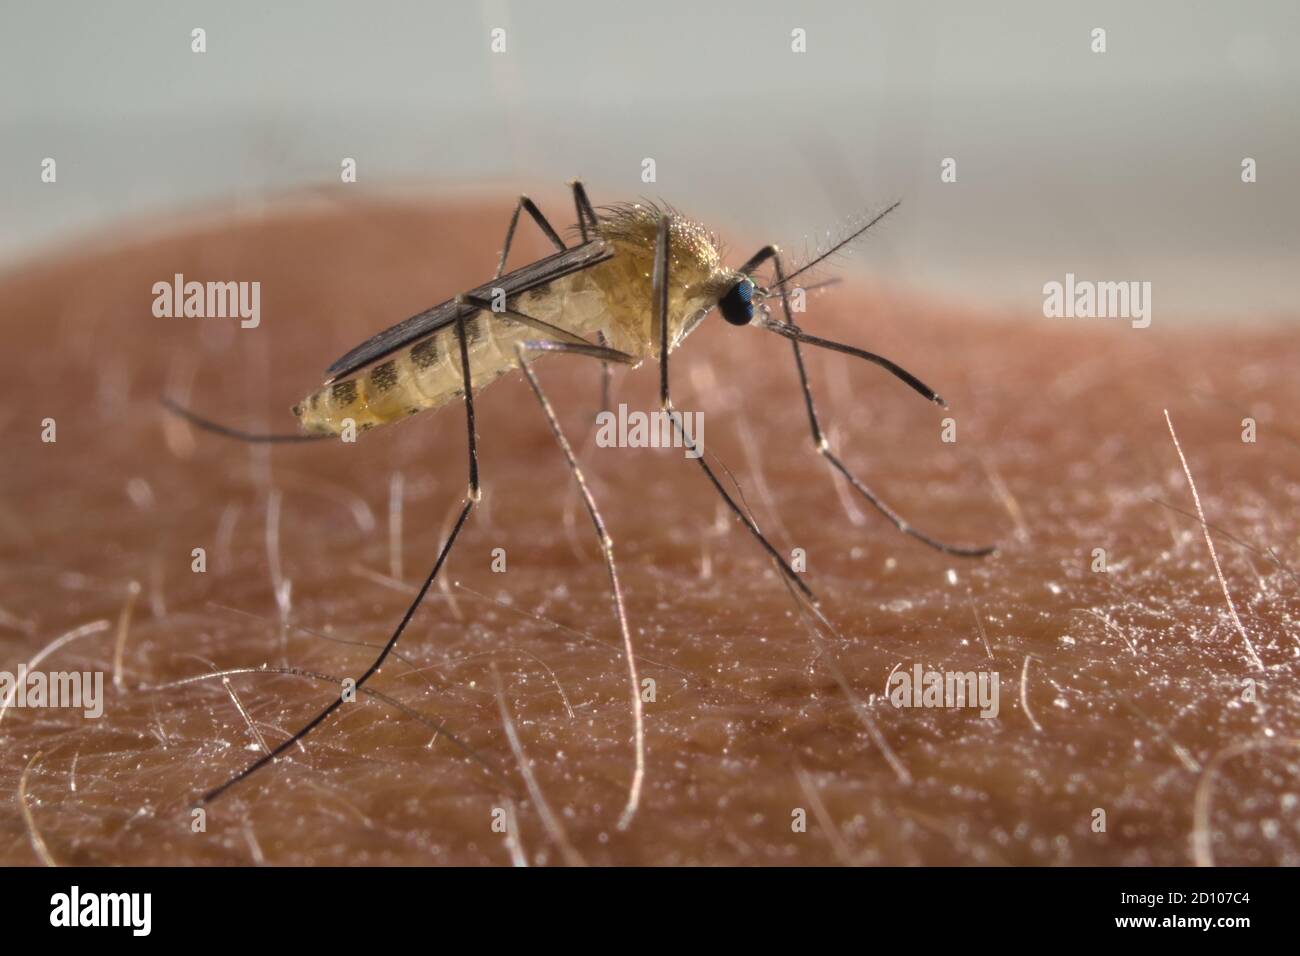 Mosquito about to puncture the skin of a man Stock Photo